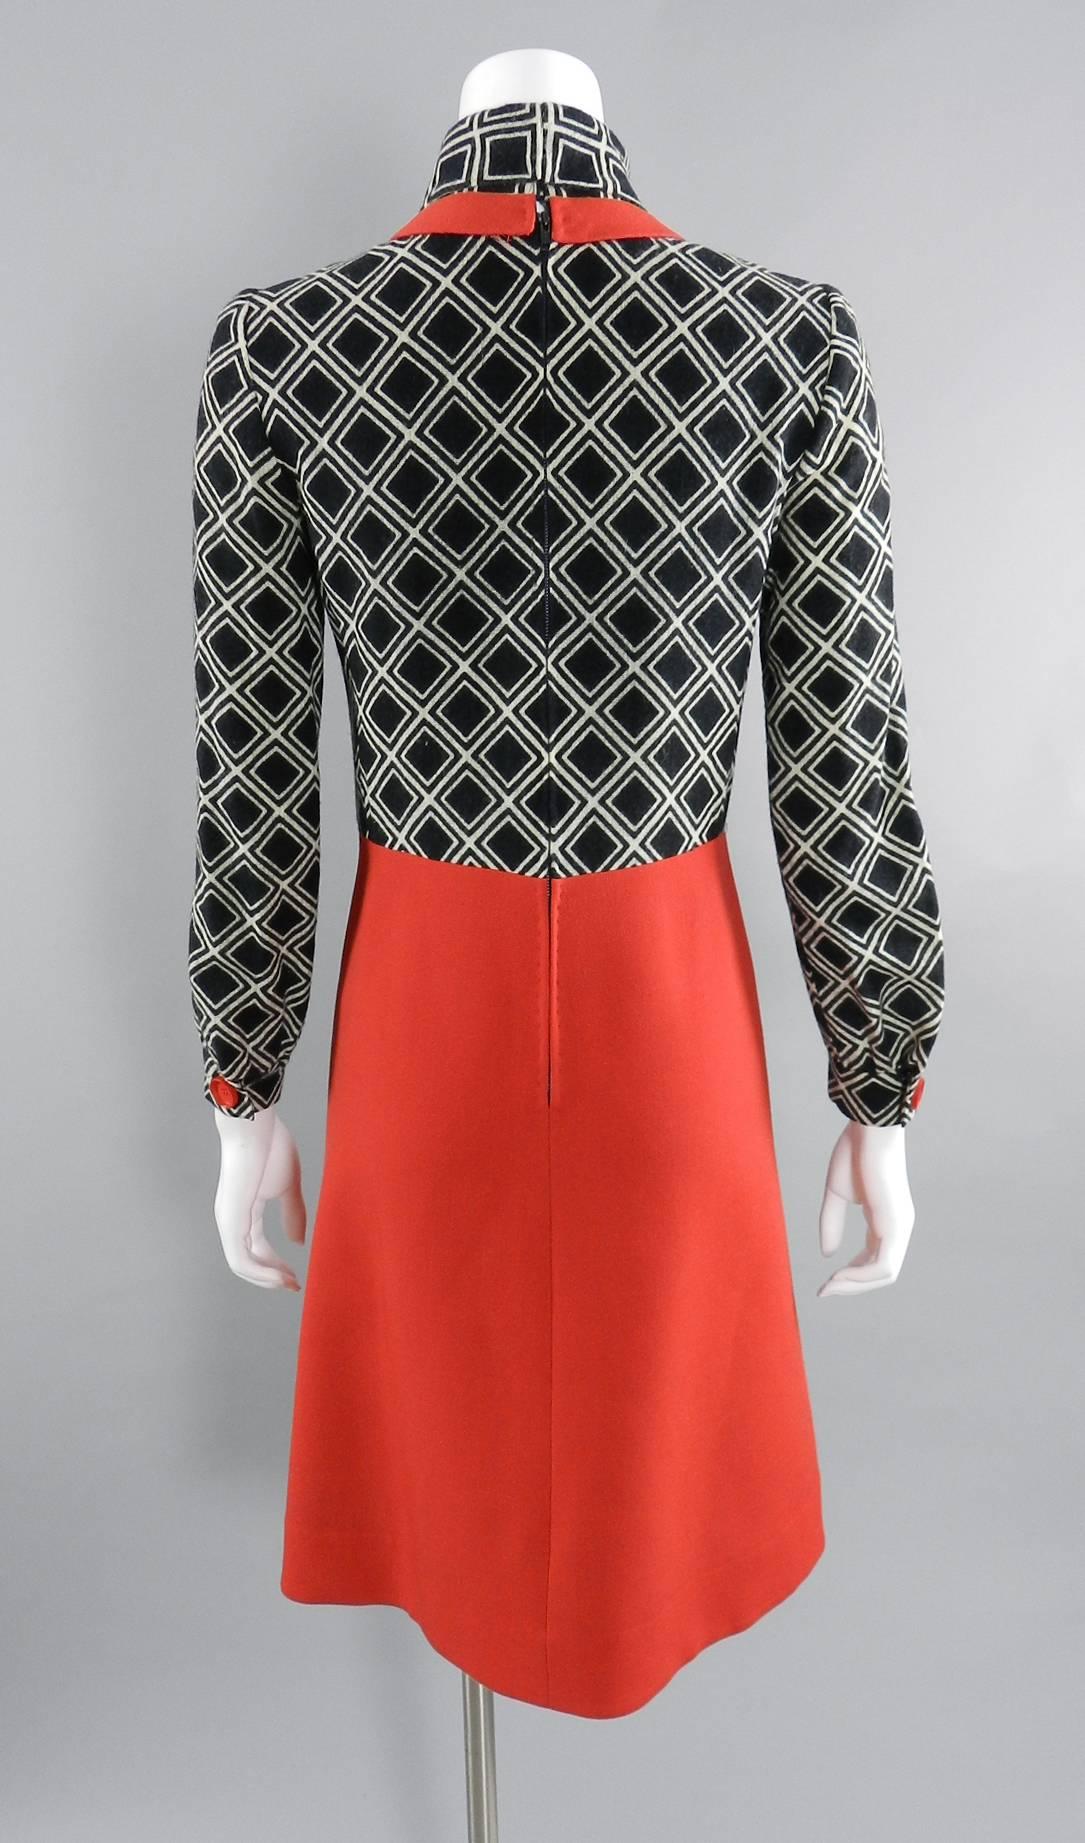 Vintage 1960's Antonio Castillo graphic mod black and red dress.  Wool with centre back zipper, turtleneck, buttons at cuffs, a-line skirt. Castillo worked at Lanvin from 1950-1962 and then opened his own house in 1964. This dress is approximately a